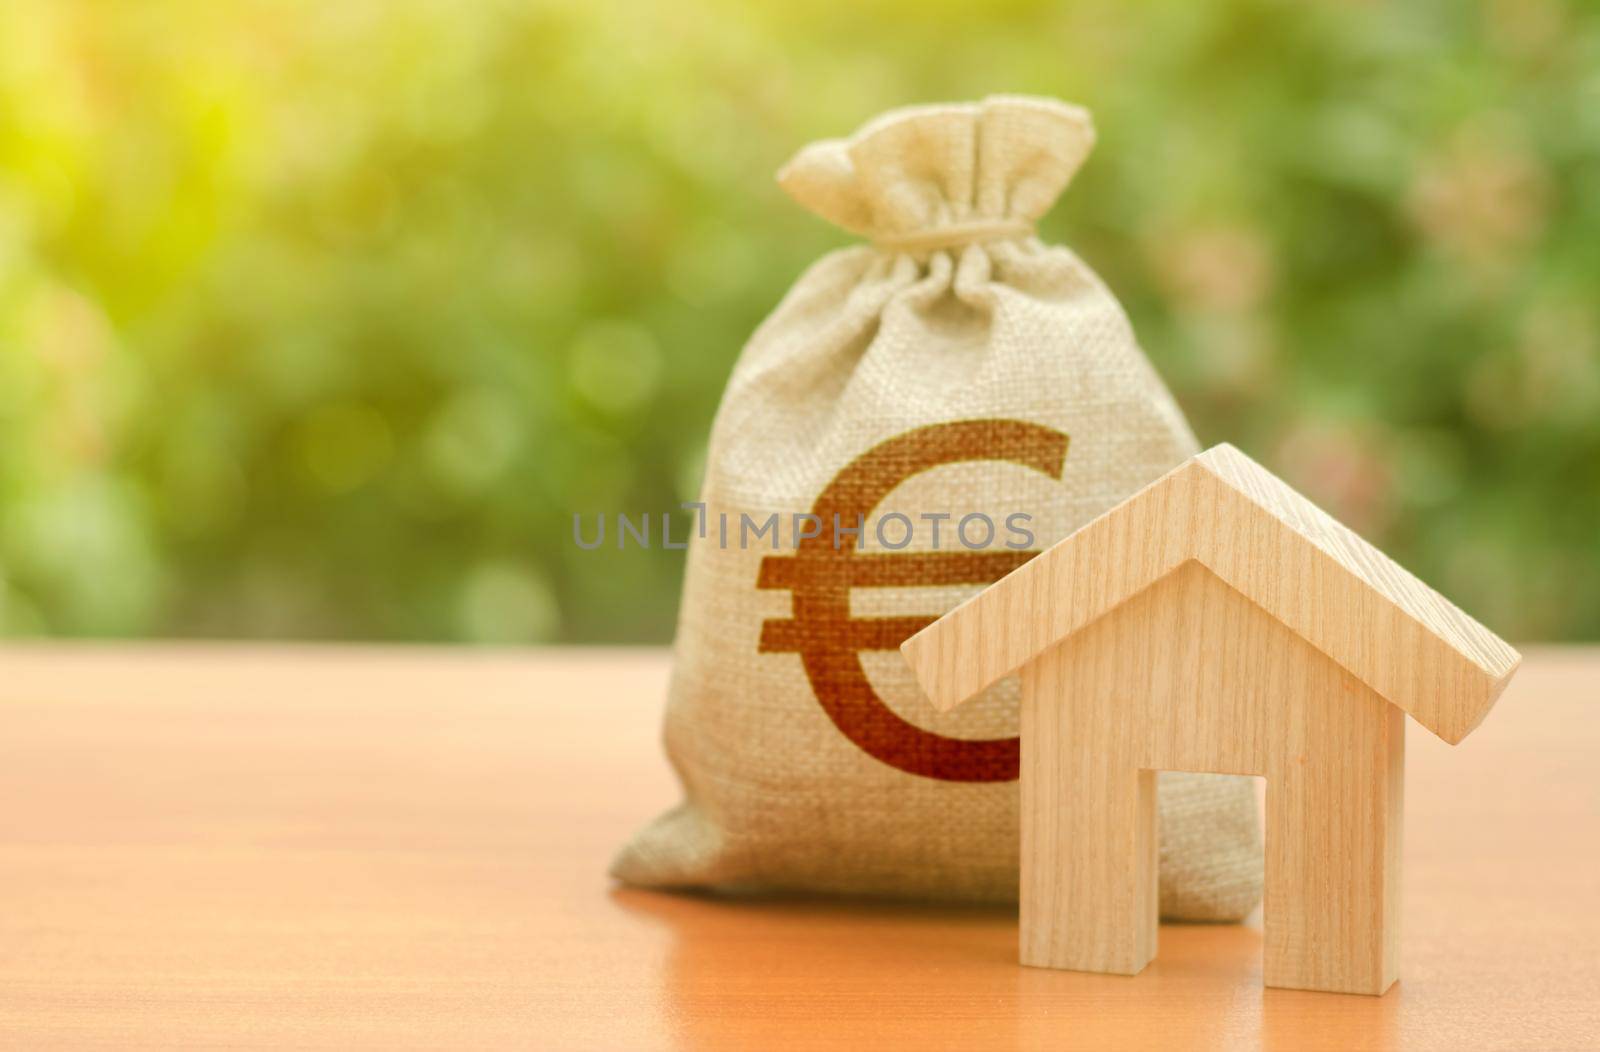 Wooden house figurine and Euro money bag on the background of nature. Budget, subsidized funds. Mortgage loan for the purchase of housing, construction or modernization. Tax, building maintenance.